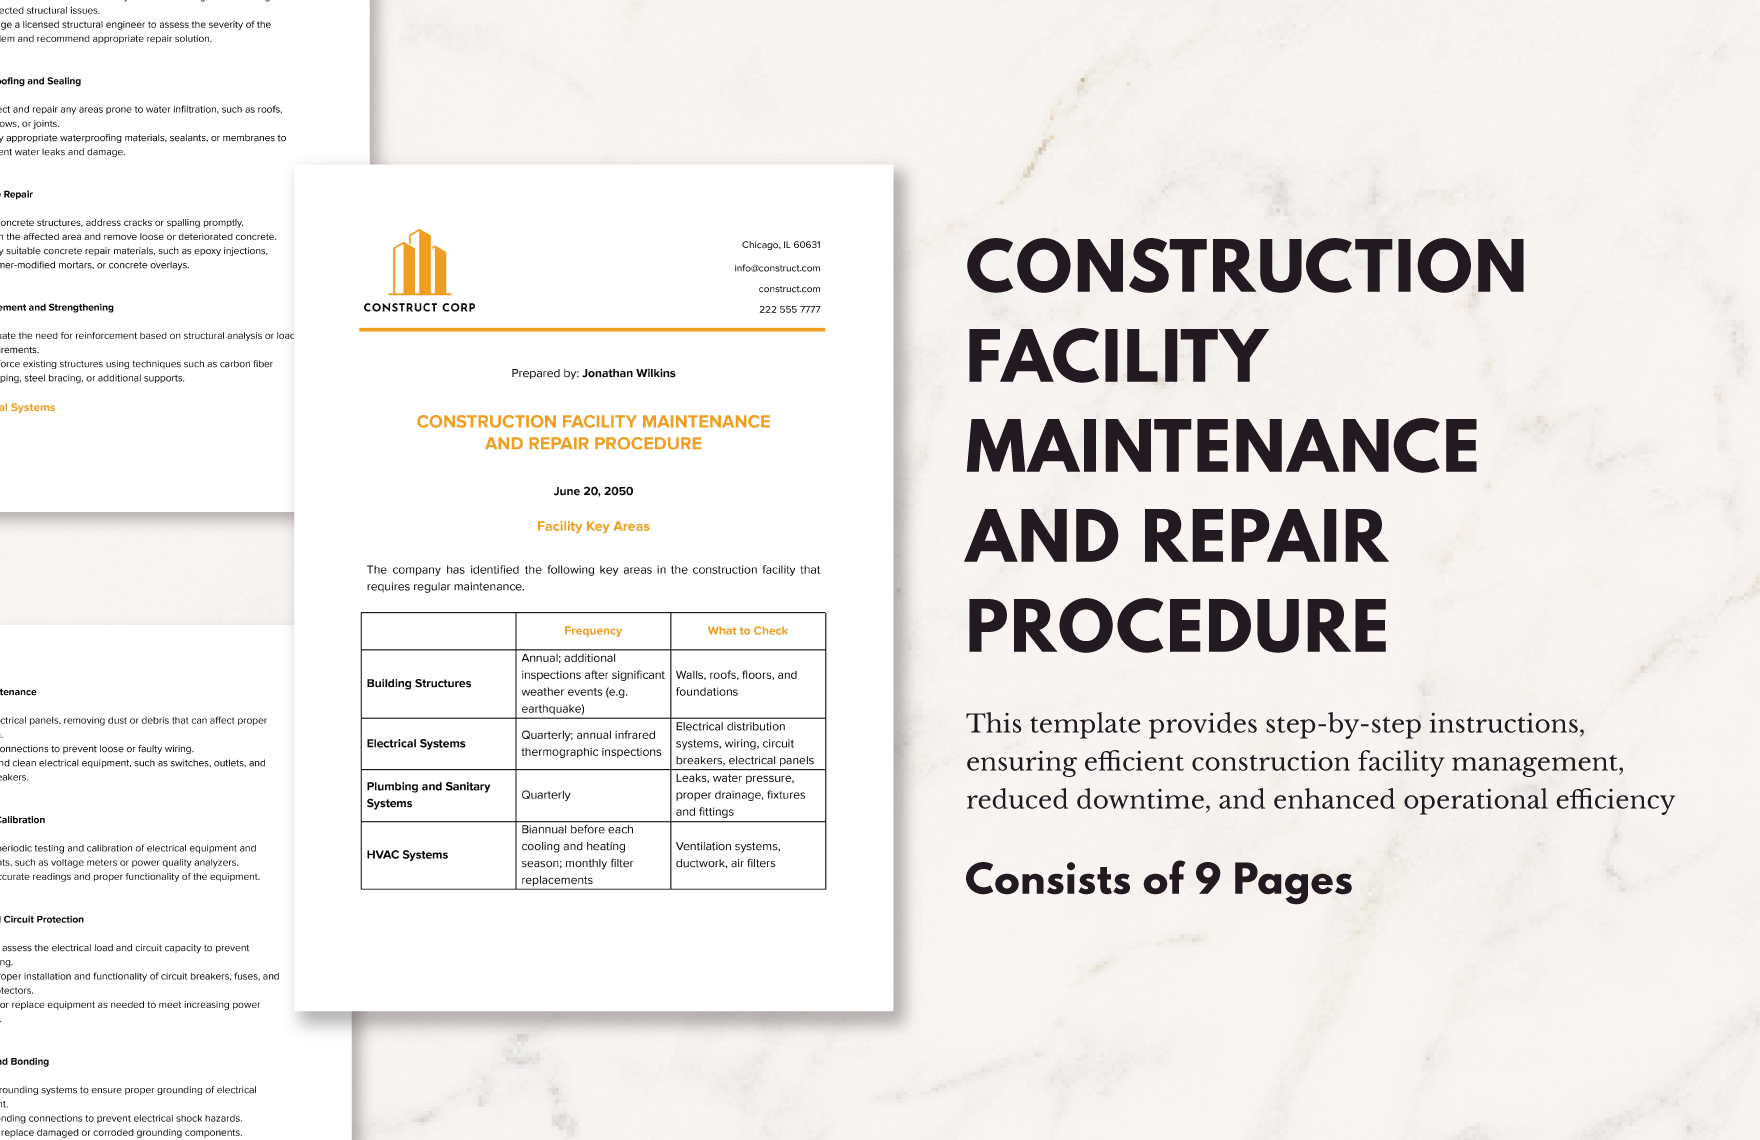 Construction Facility Maintenance and Repair Procedure in Word, Google Docs